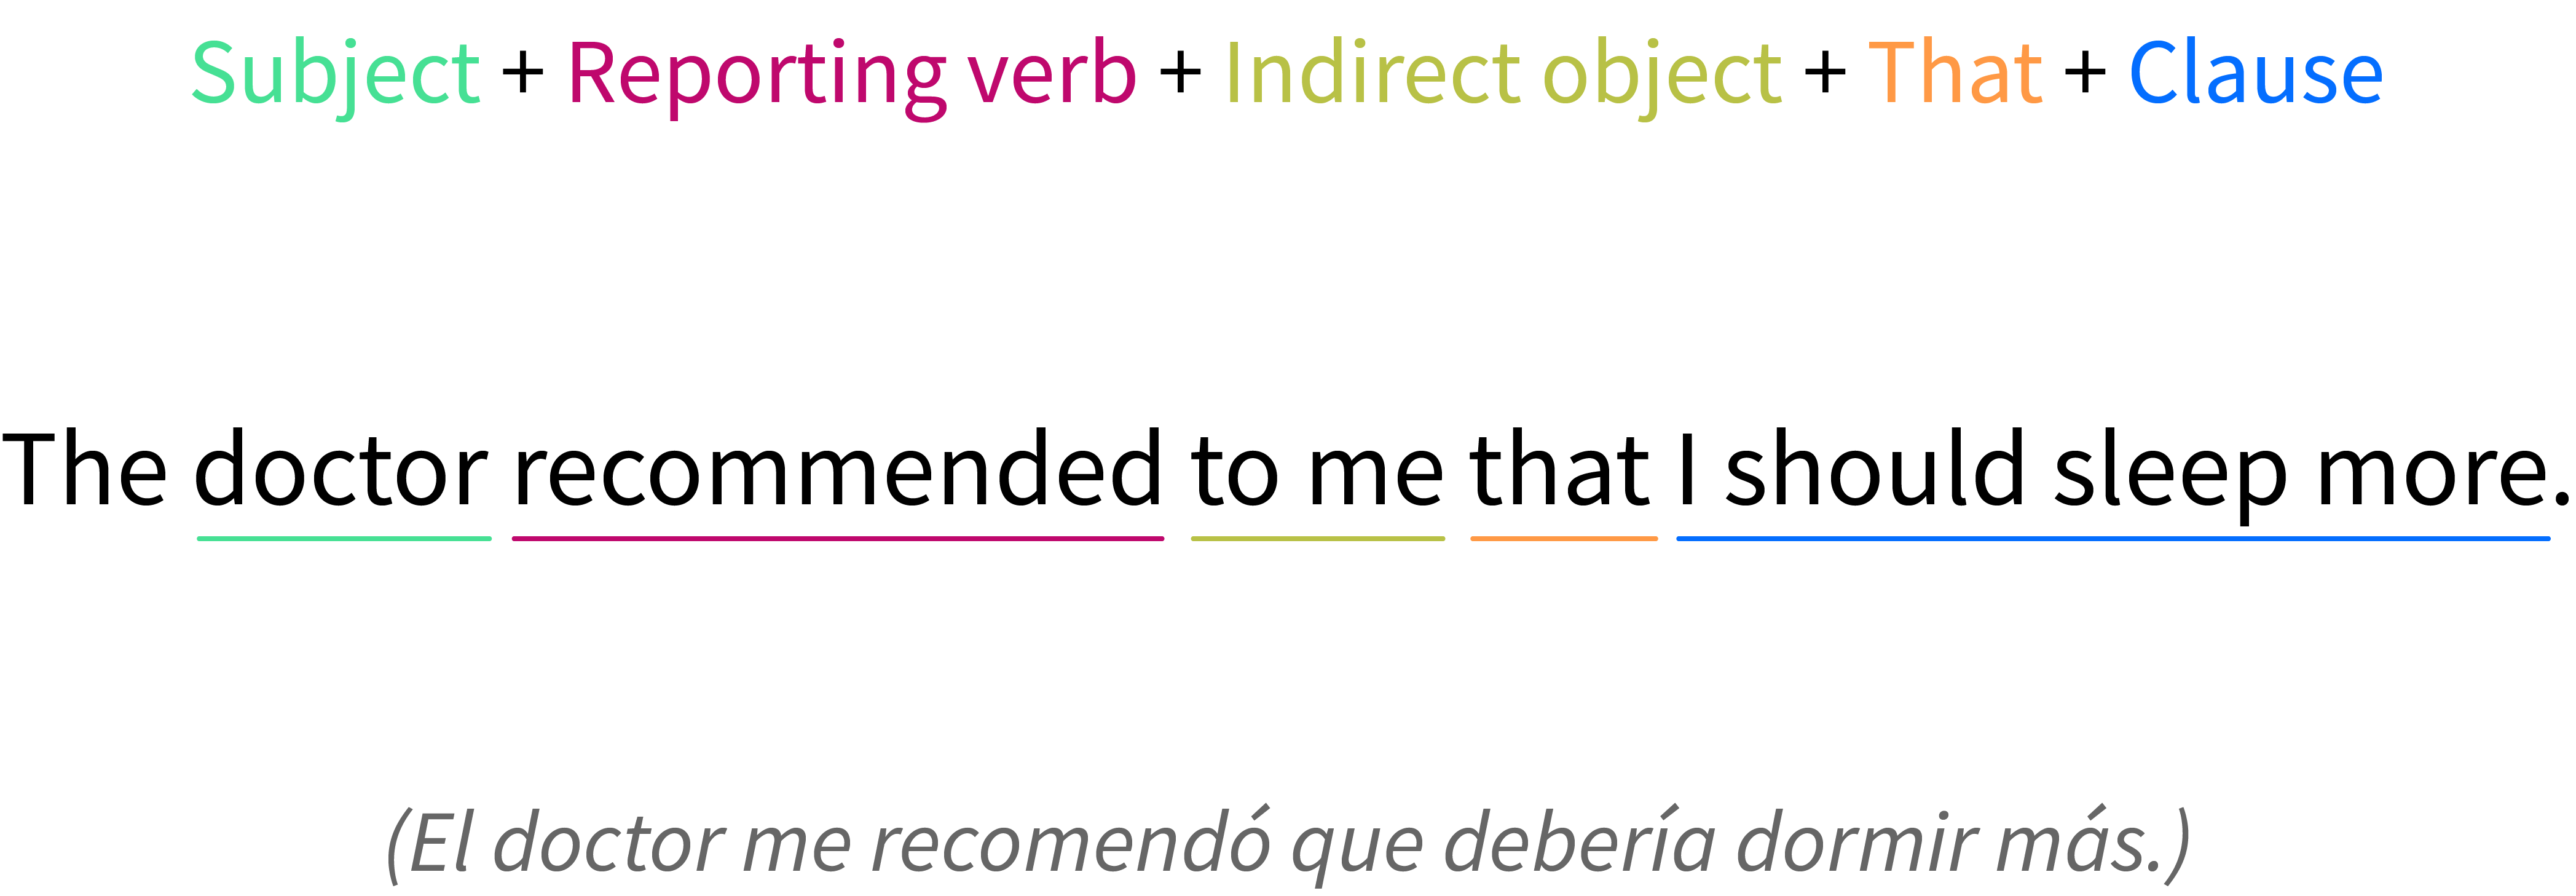 Sentence using a reporting verb with a indirect object.